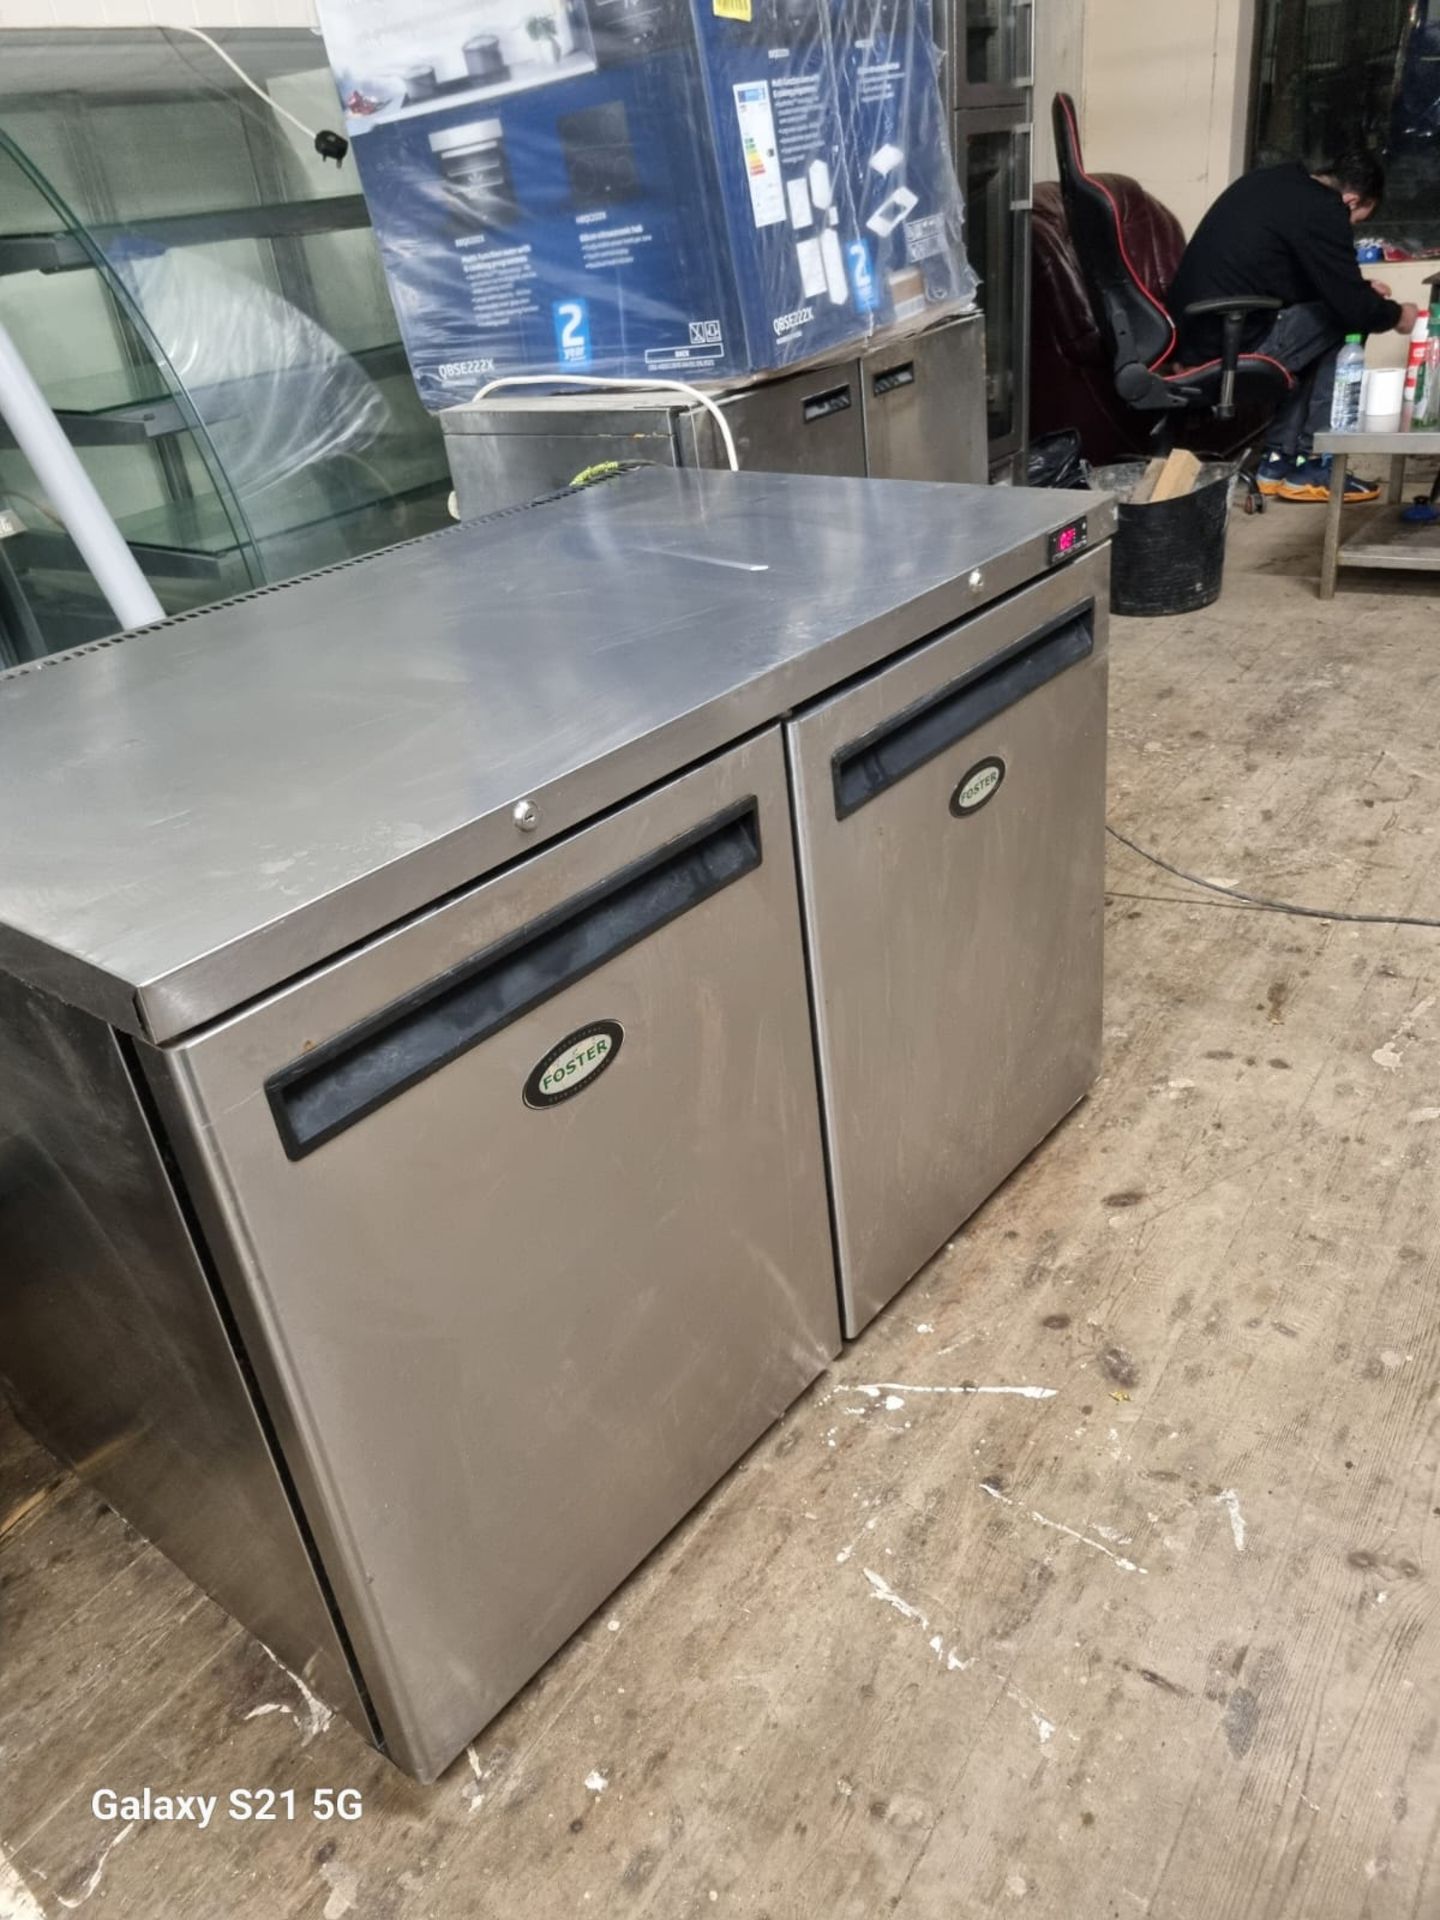 FOSTER HR360 UNDER COUNTER FRIDGE - 1200 MM W 700 MM D - FULLY WORKING - Image 3 of 6